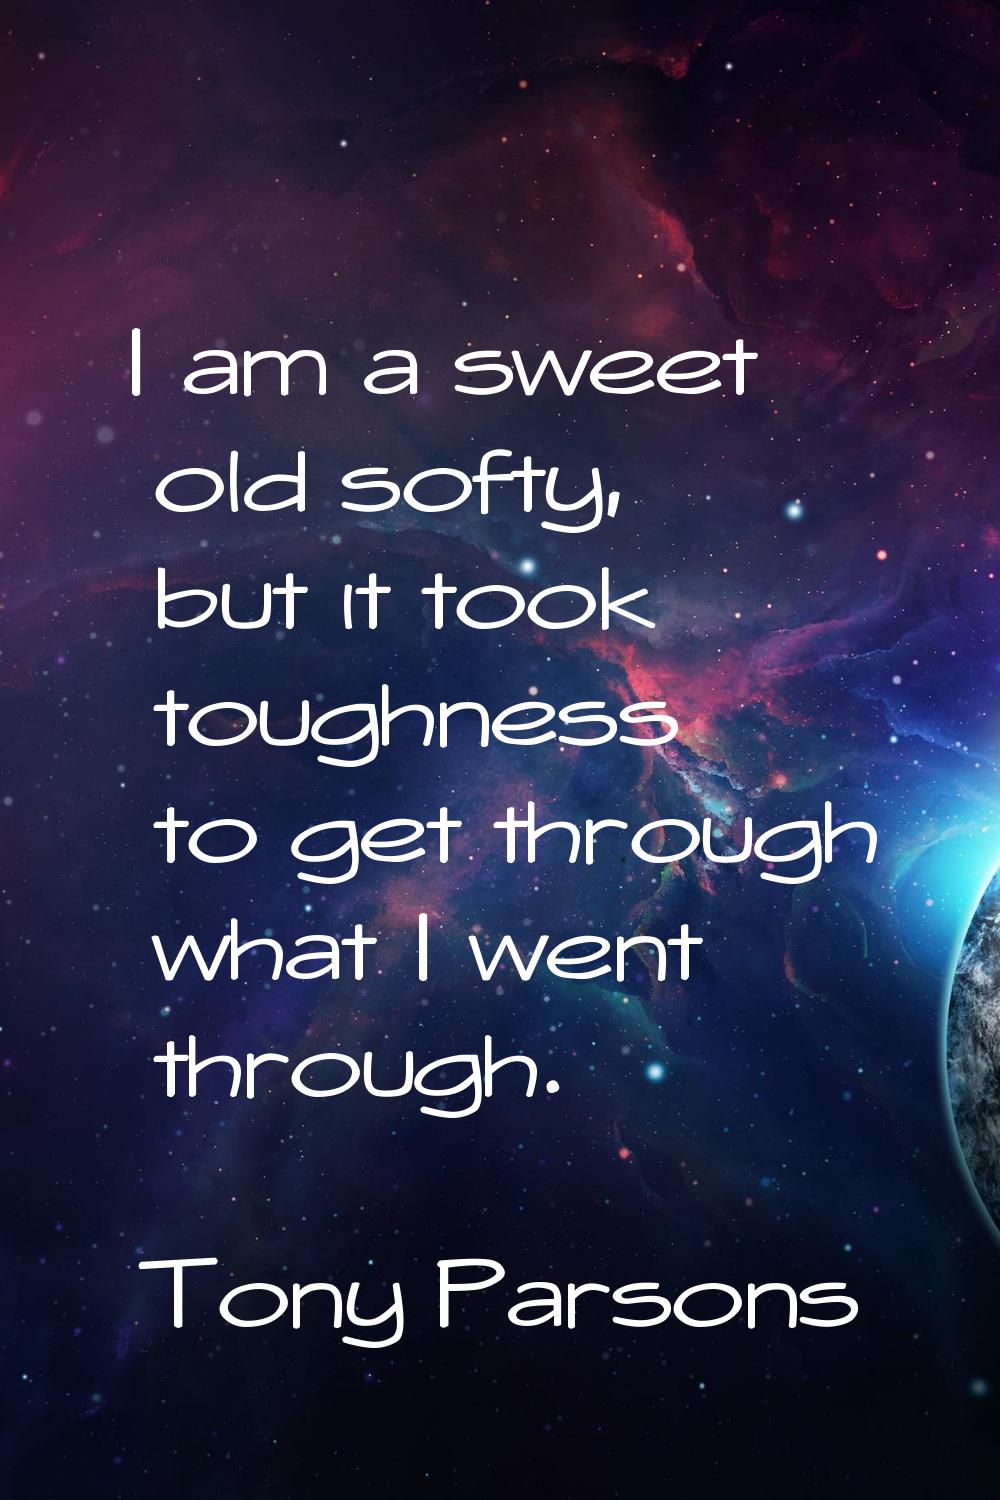 I am a sweet old softy, but it took toughness to get through what I went through.